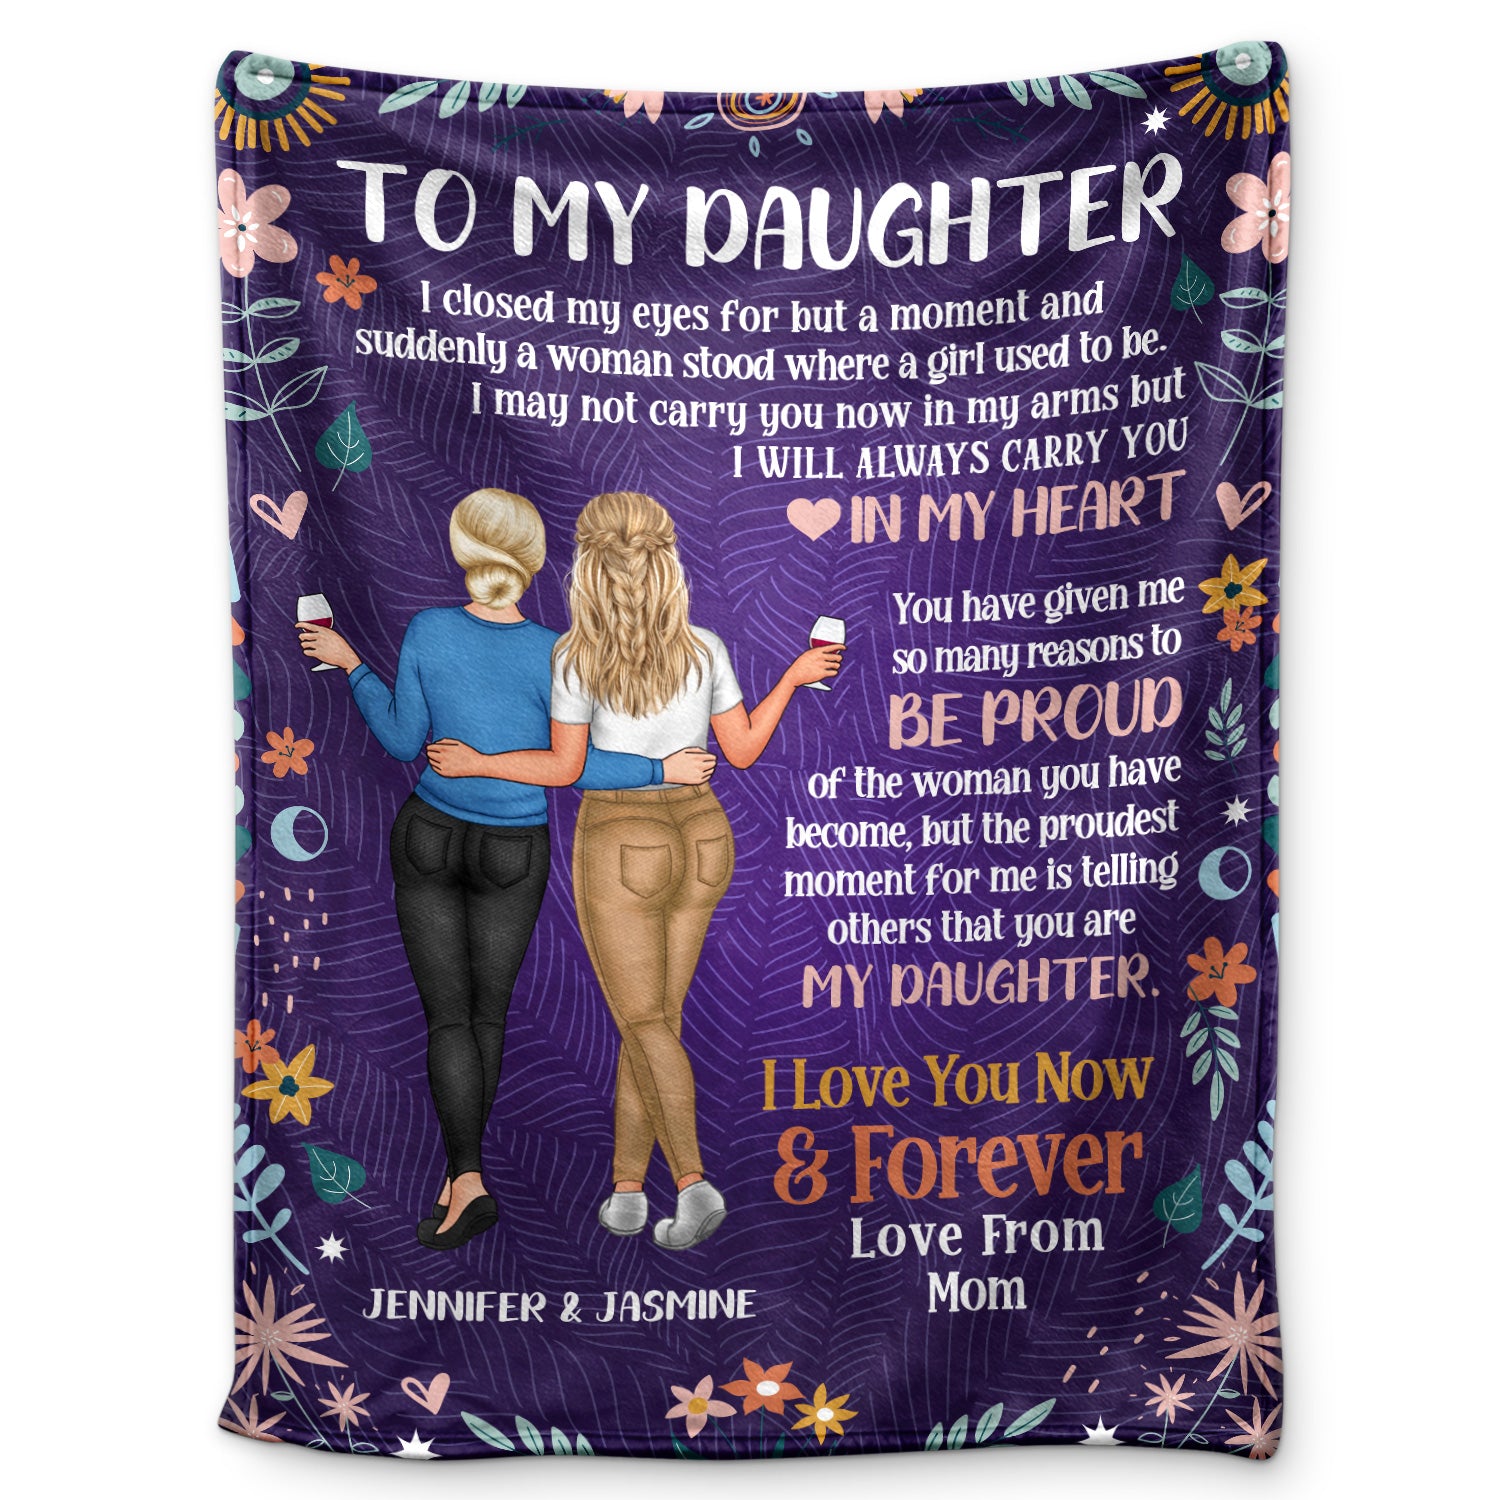 Daughter Closed My Eyes For A Momment - Gift For Daughter - Personalized Fleece Blanket, Sherpa Blanket